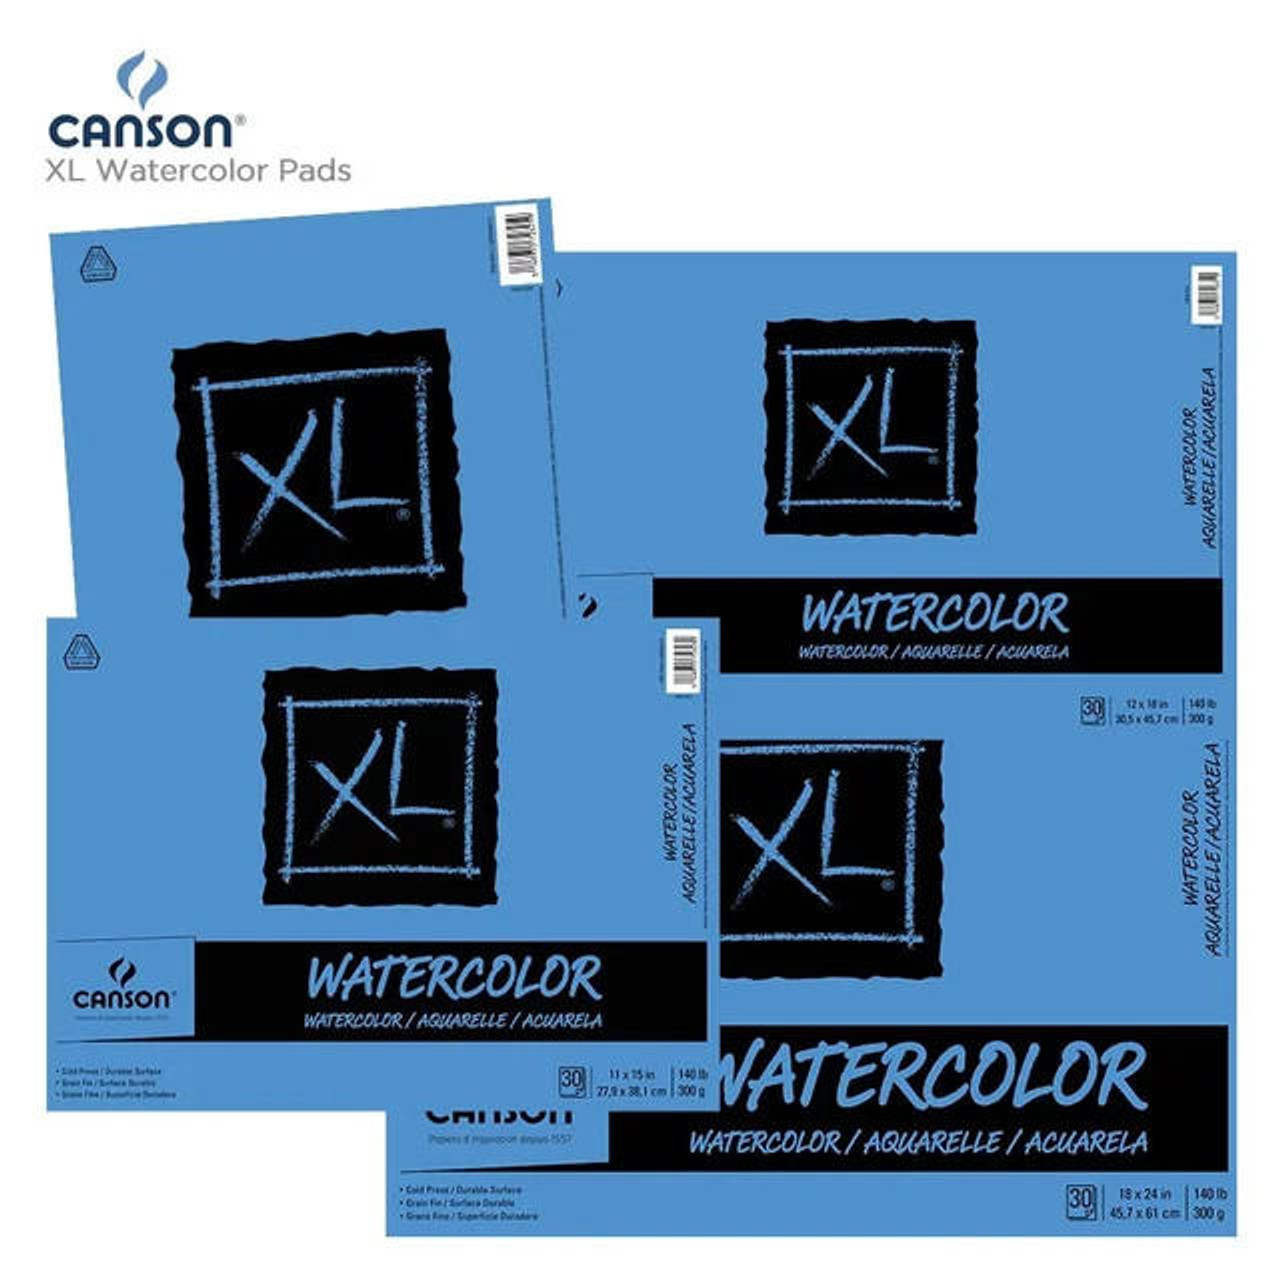 Canson Montval Watercolor Paper Pad 140 lbs., 12 Sheets - 18 x 24